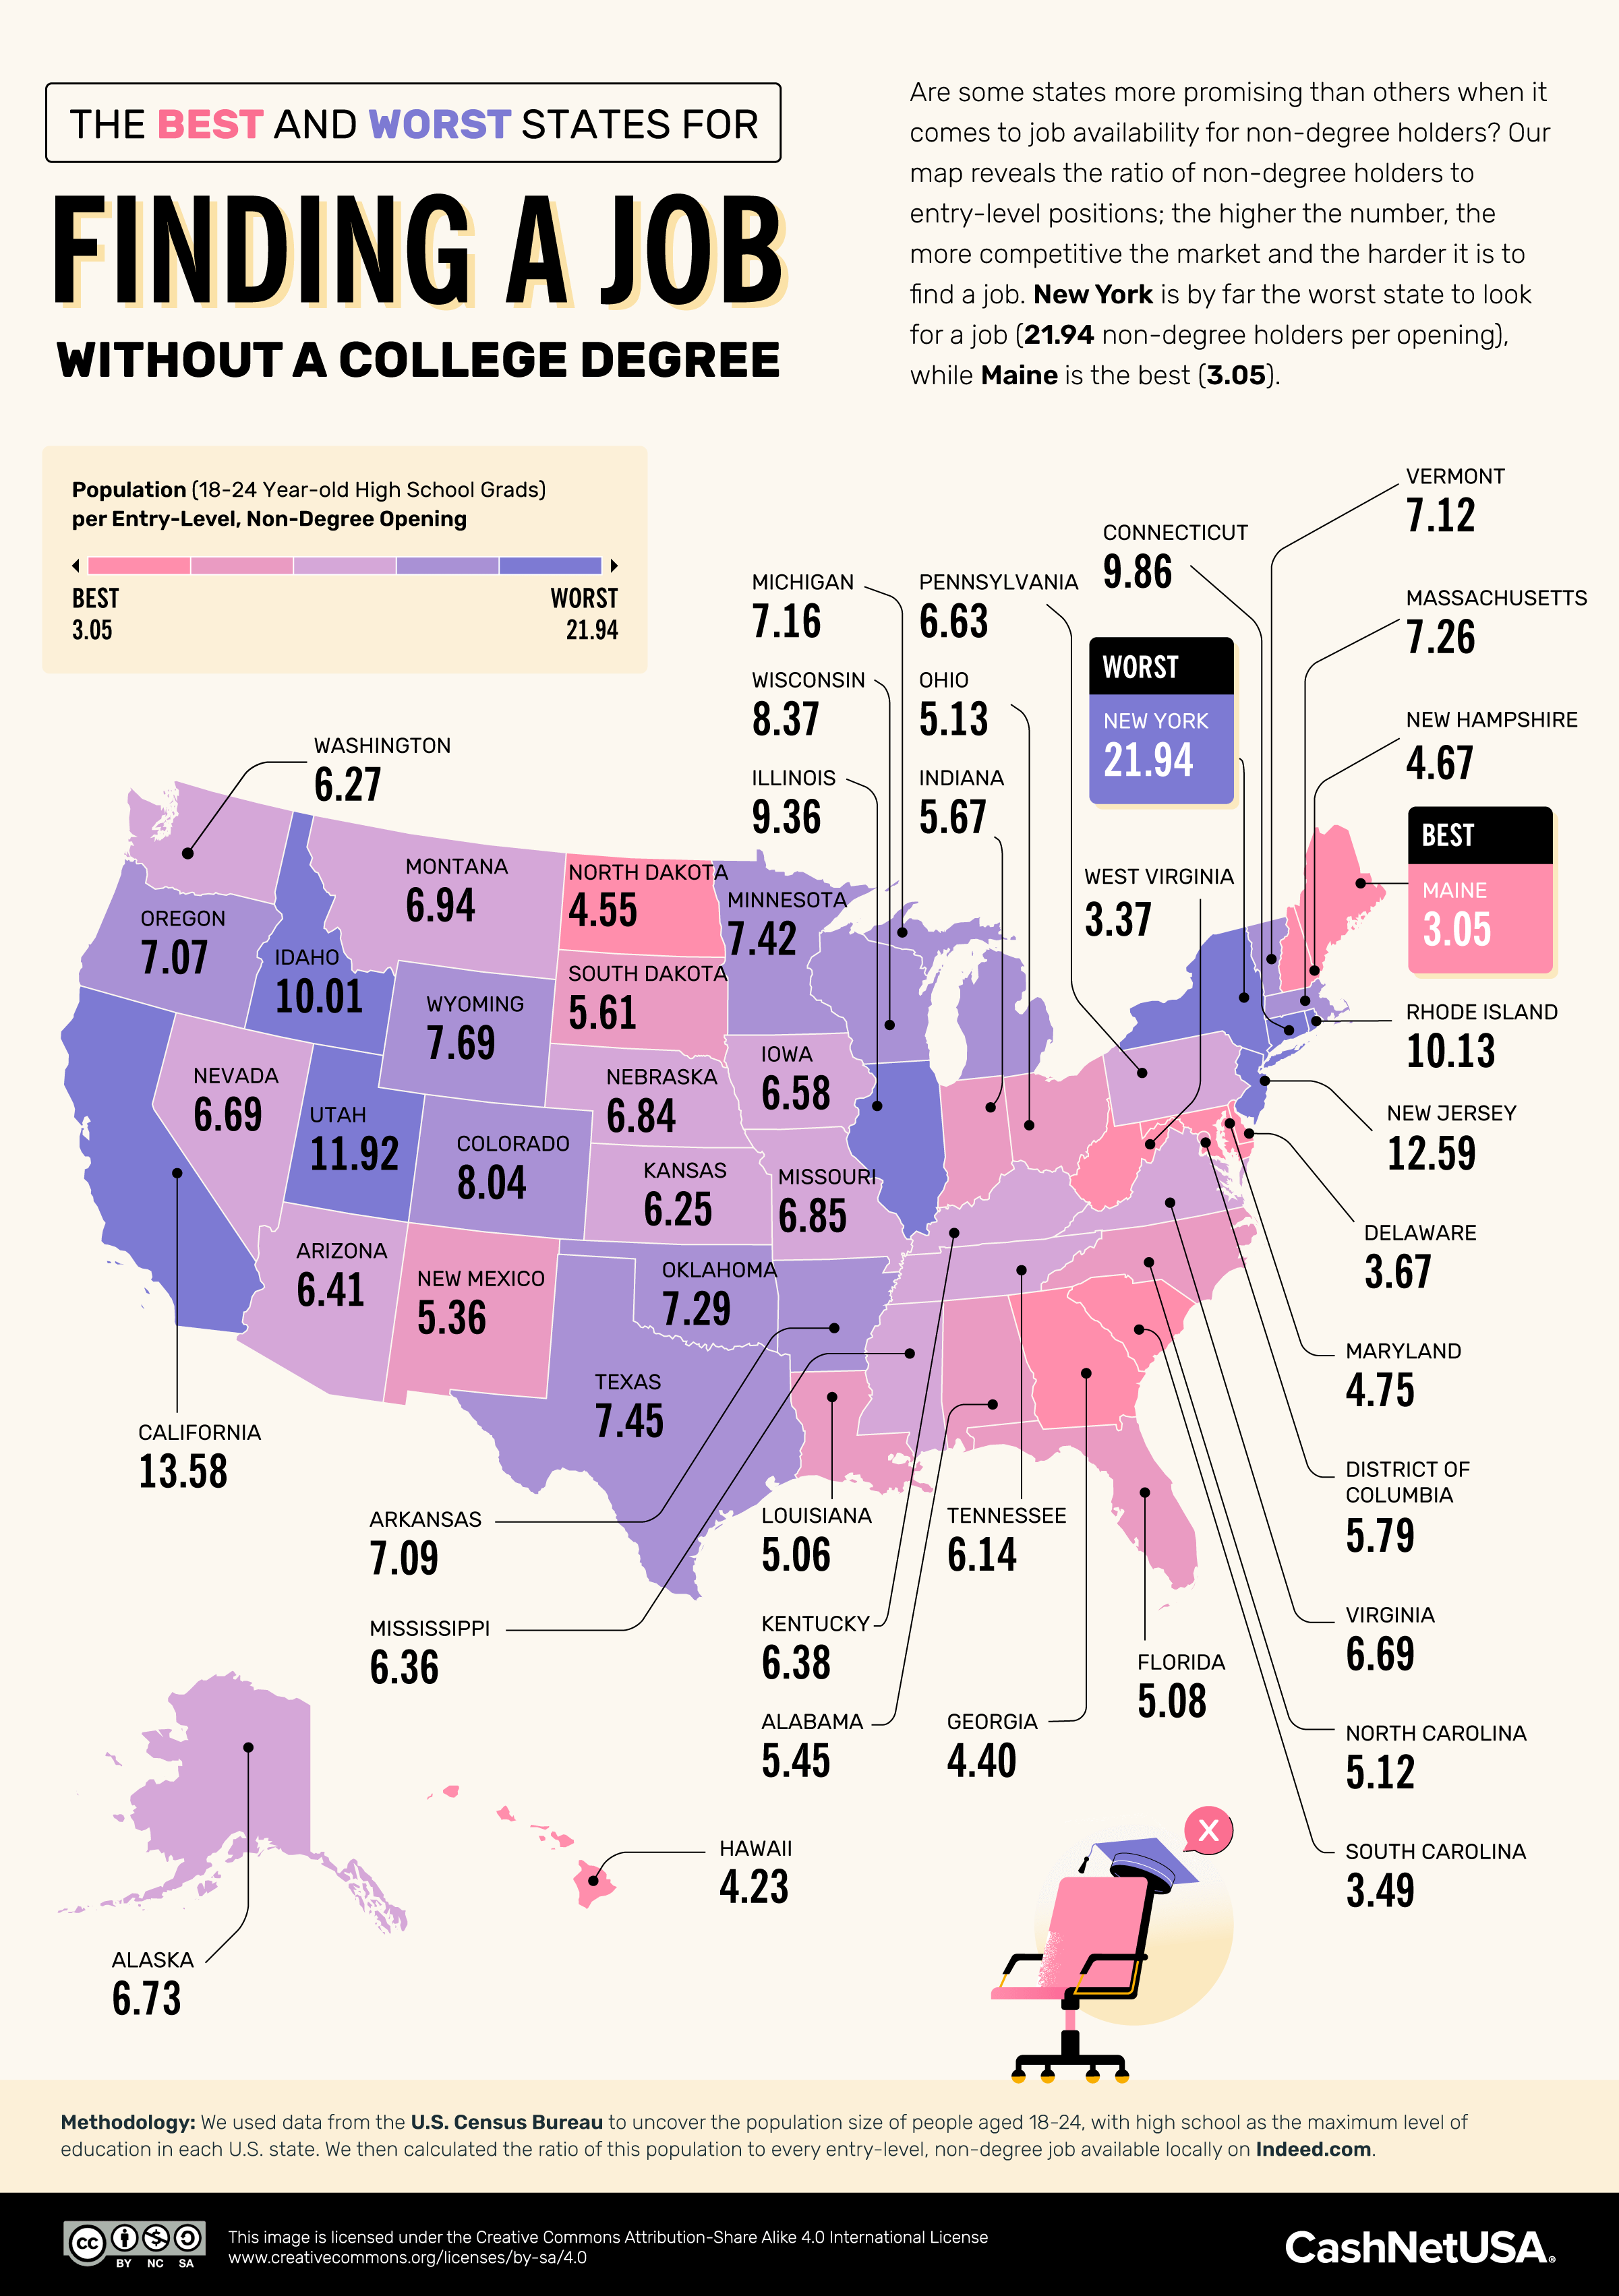 U.S. states with the most and least competitive job markets for non-degree holders